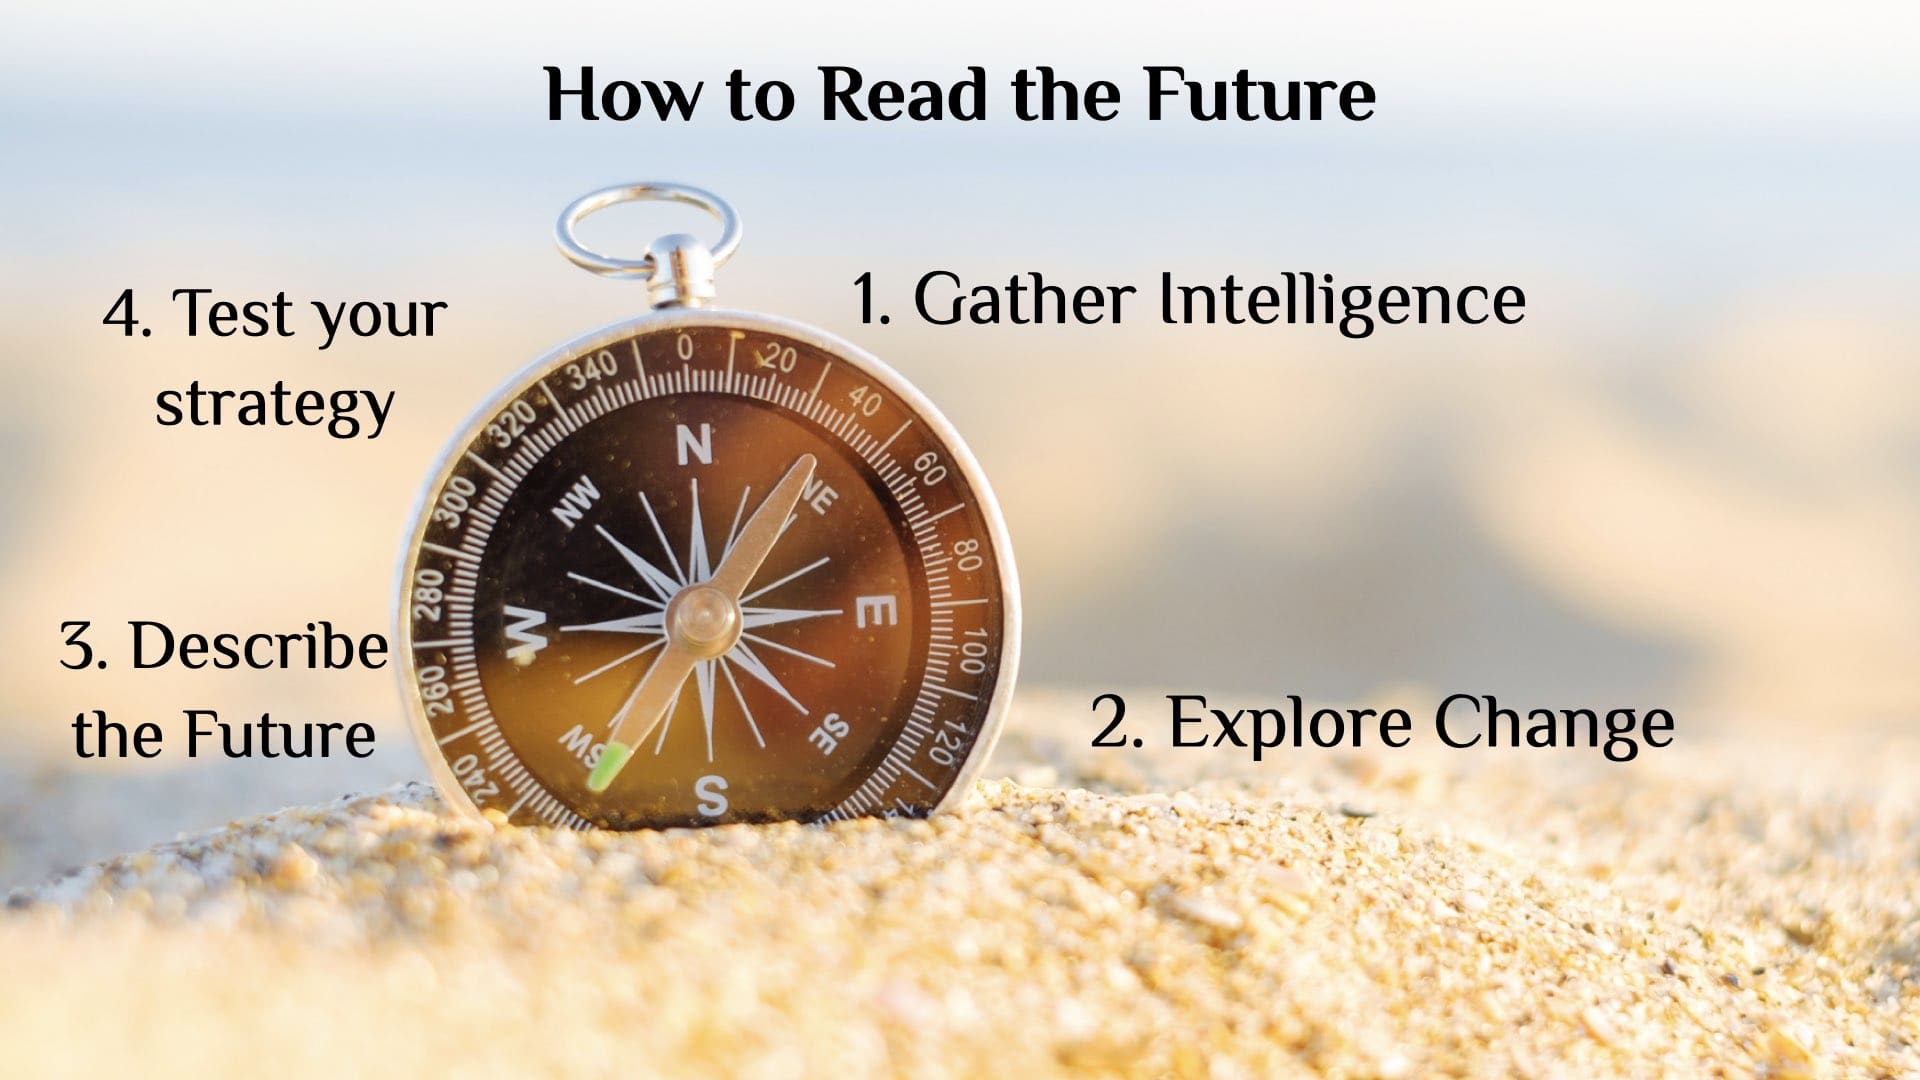 The Compass model encompasses the entire futures thinking process